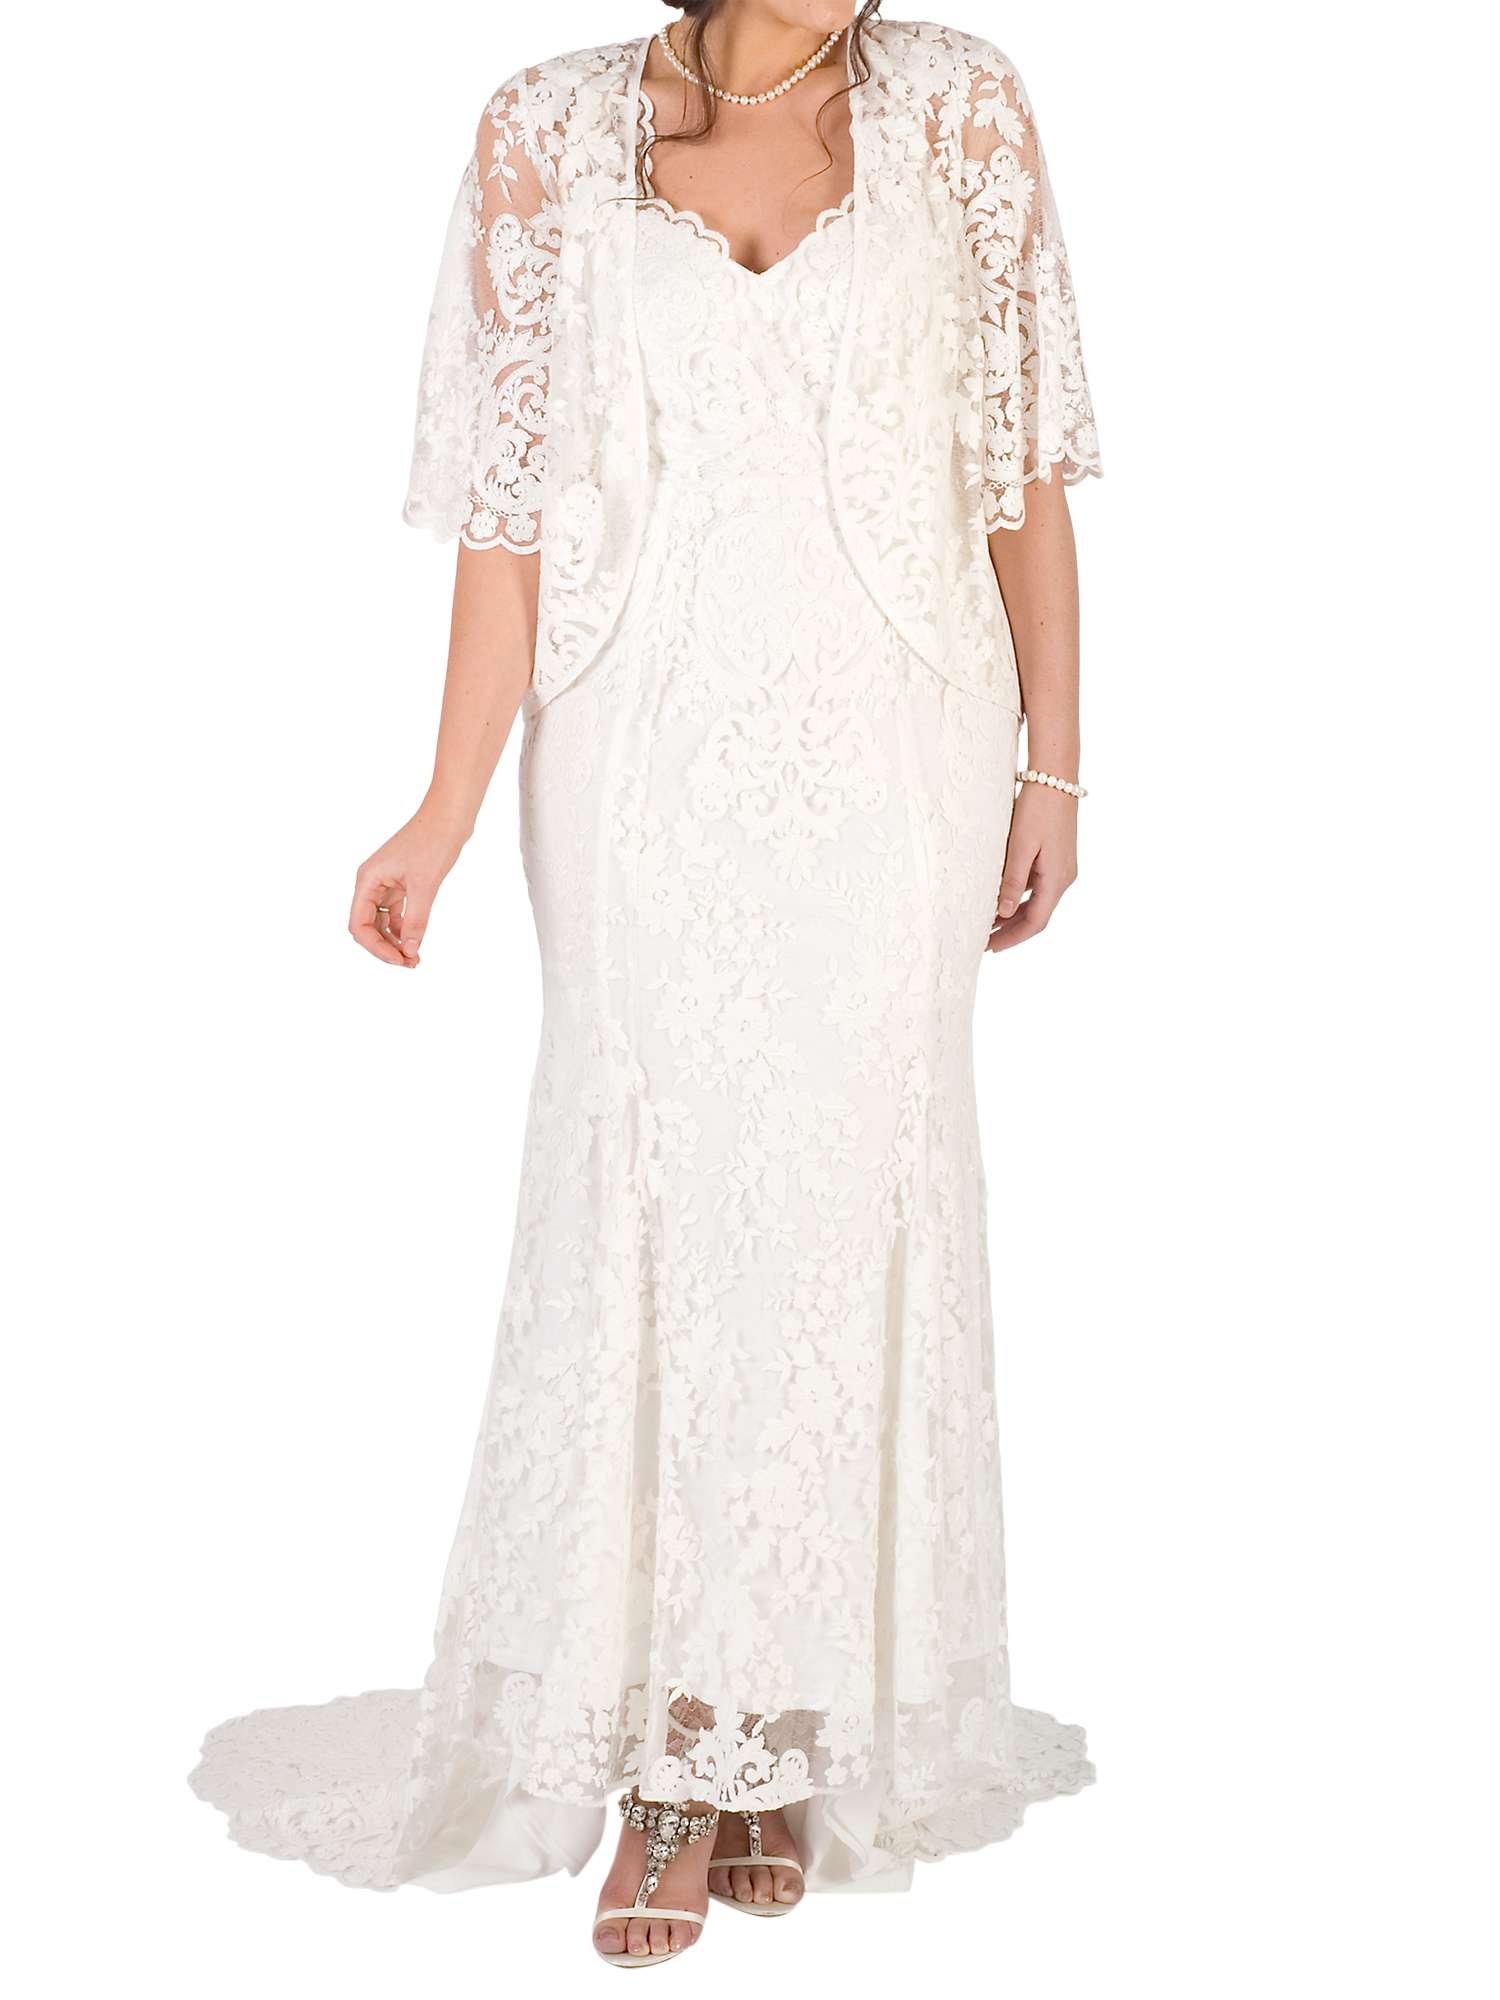 Buy Chesca Scallop Lace Wedding Dress, Ivory Online at johnlewis.com